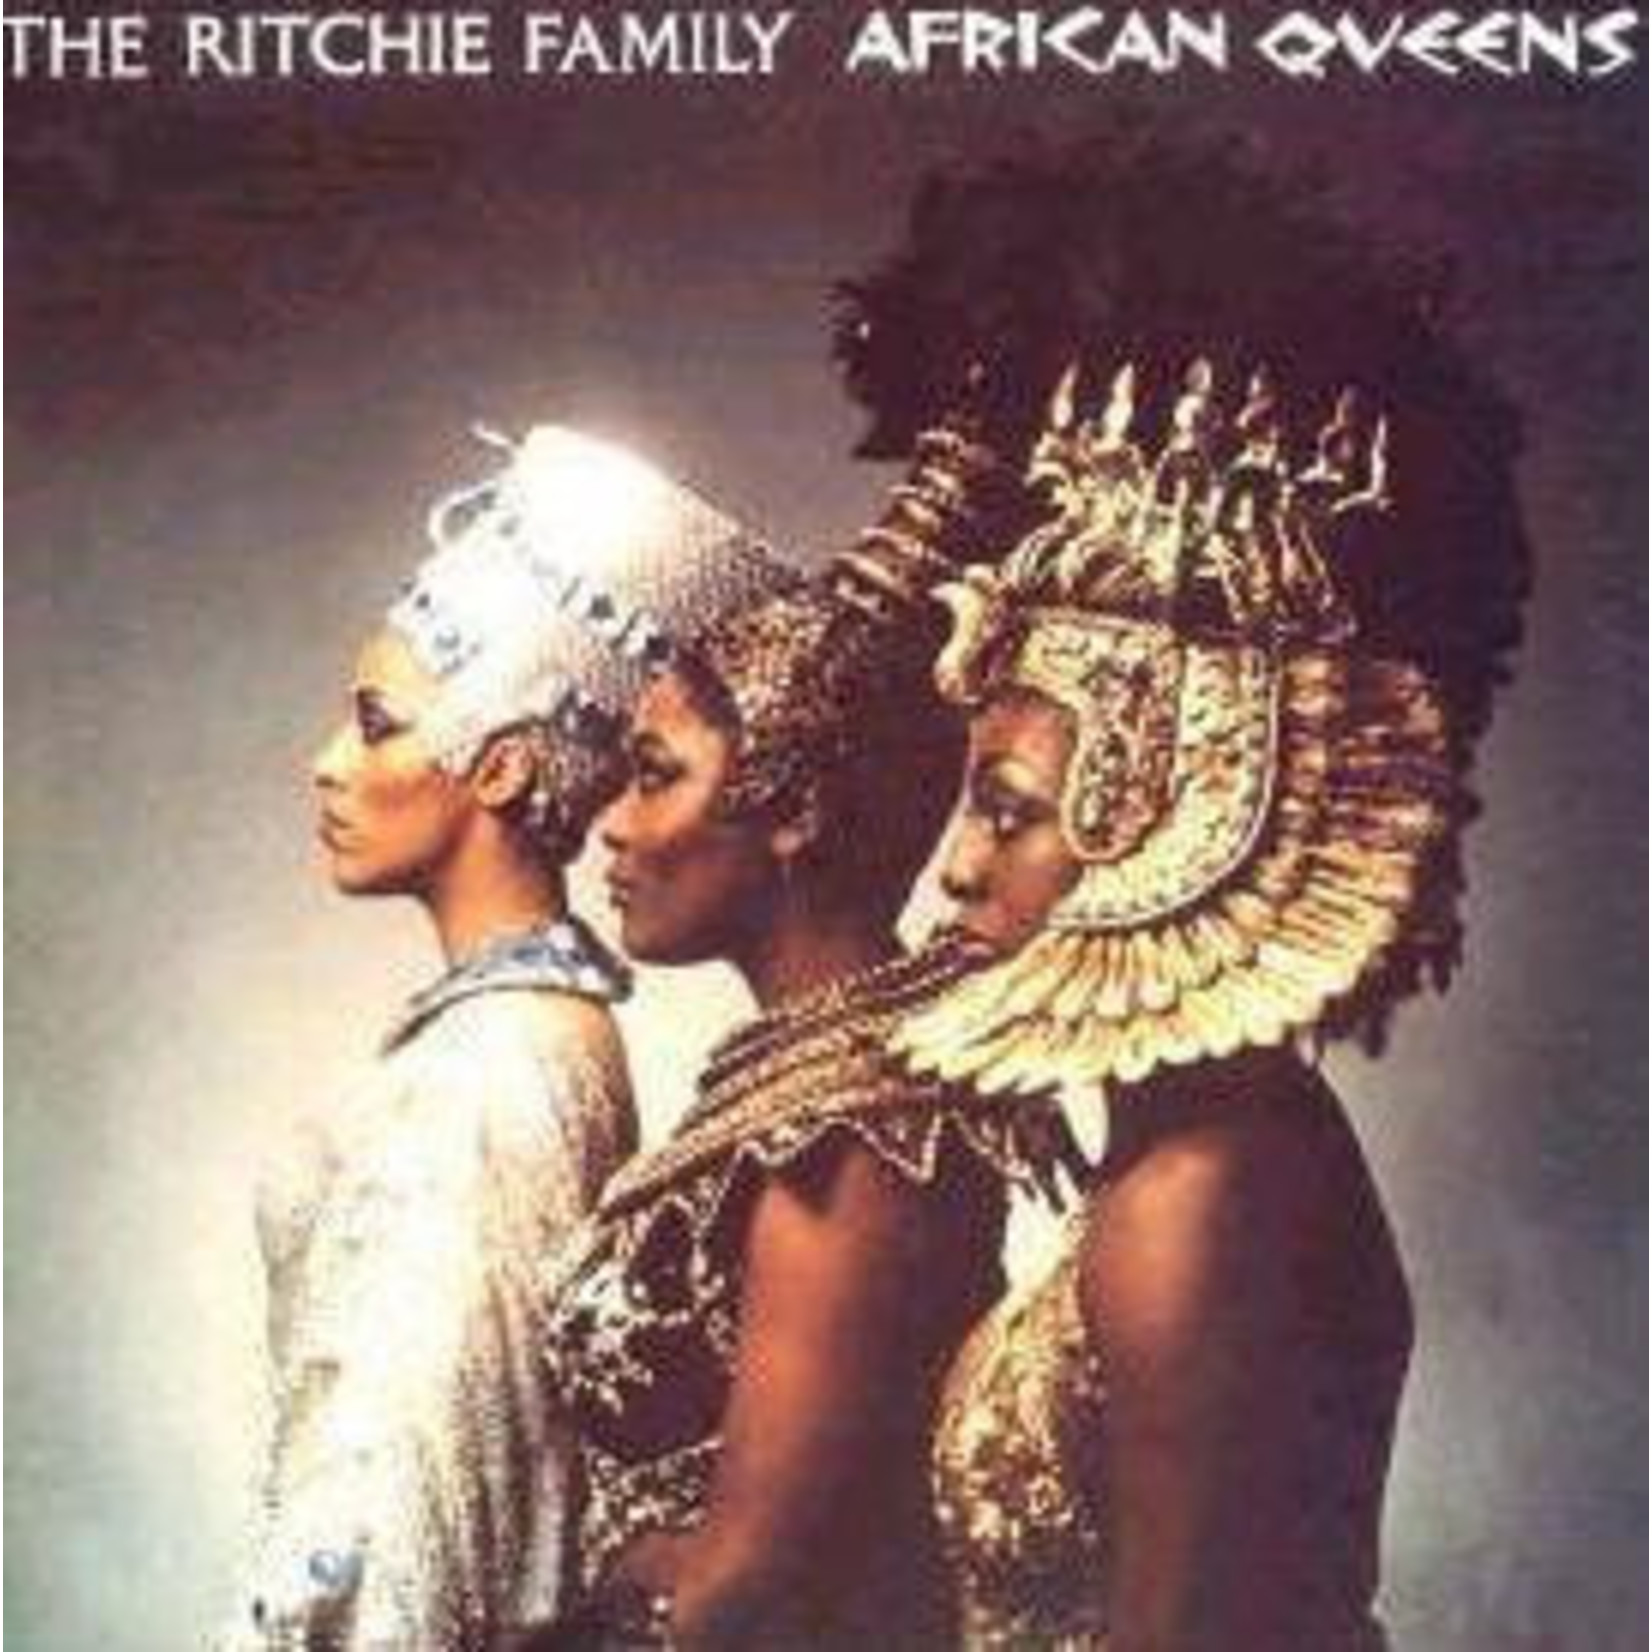 The Ritchie Family – African Queens LP